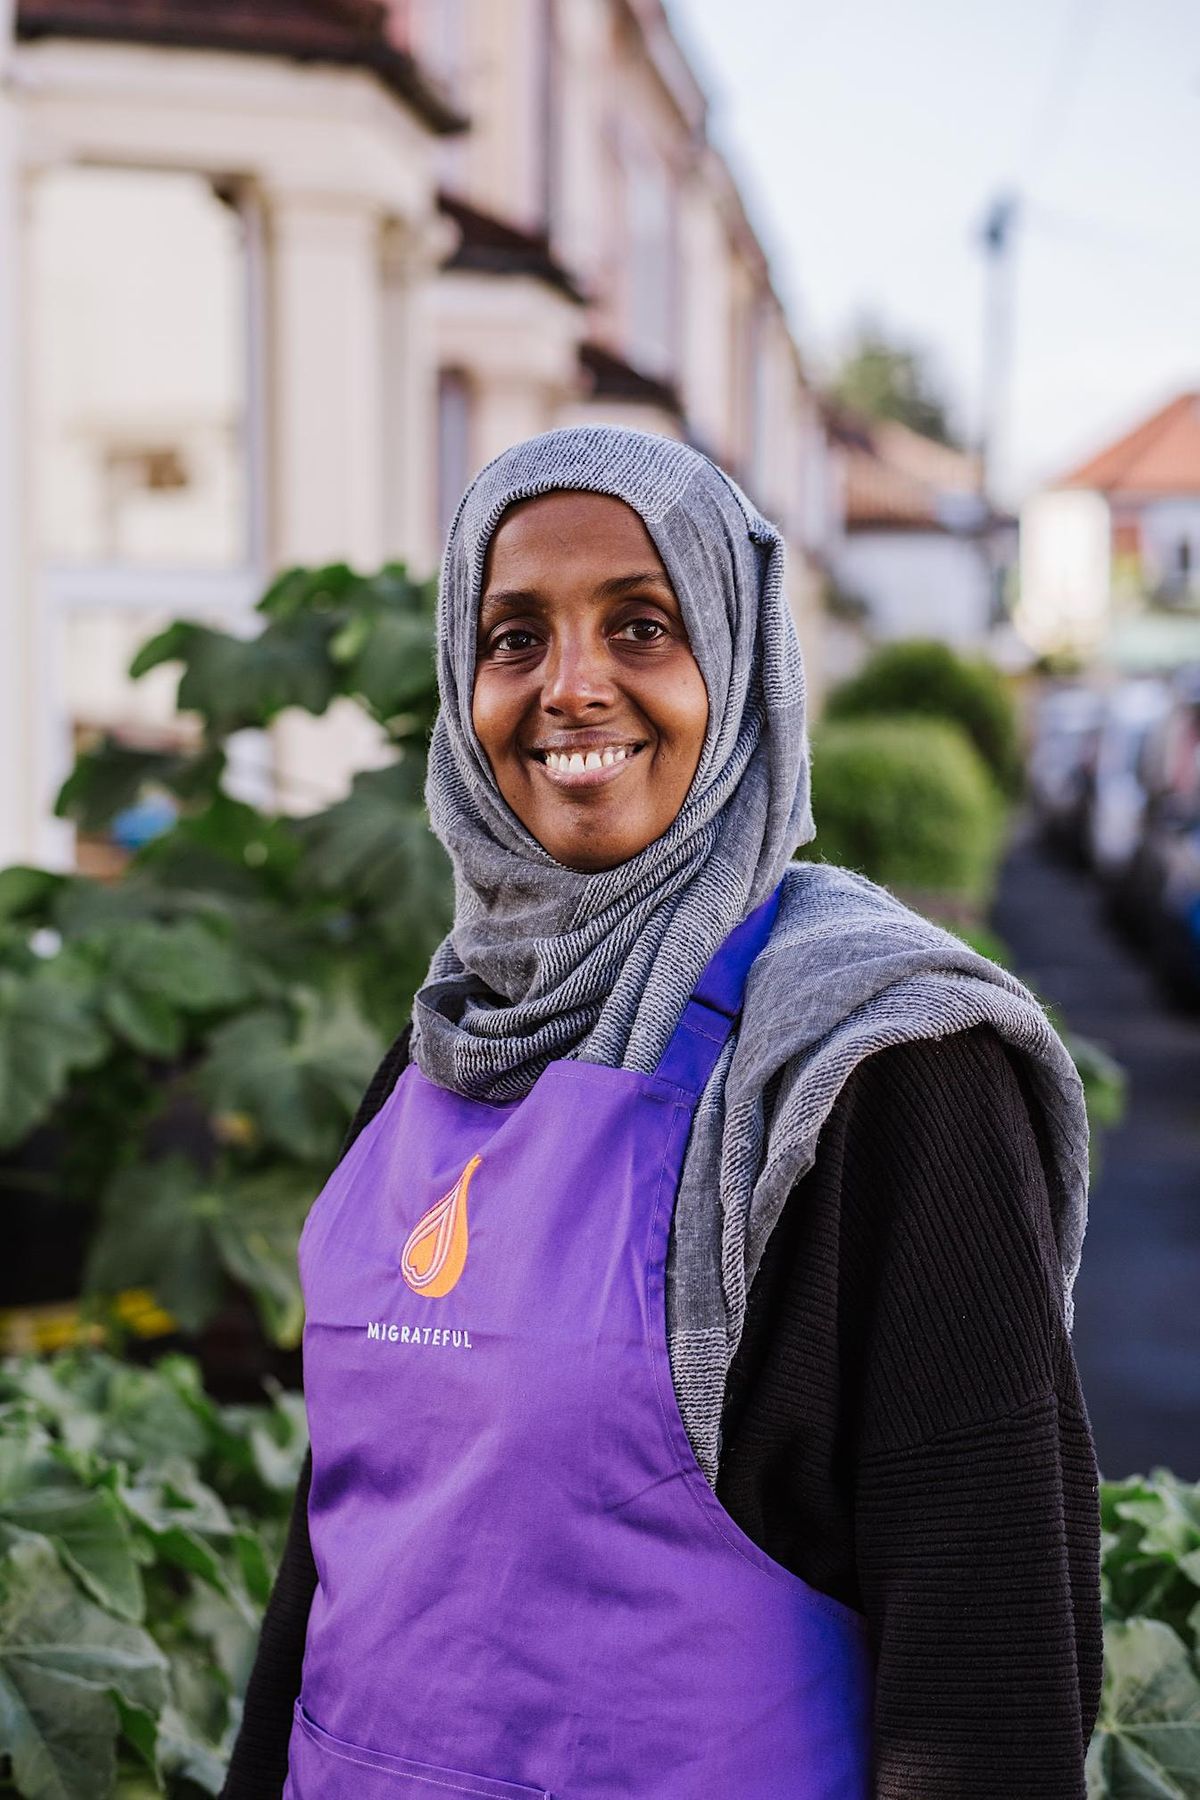 Somali Cookery Class with Obah | Family Style | BRISTOL